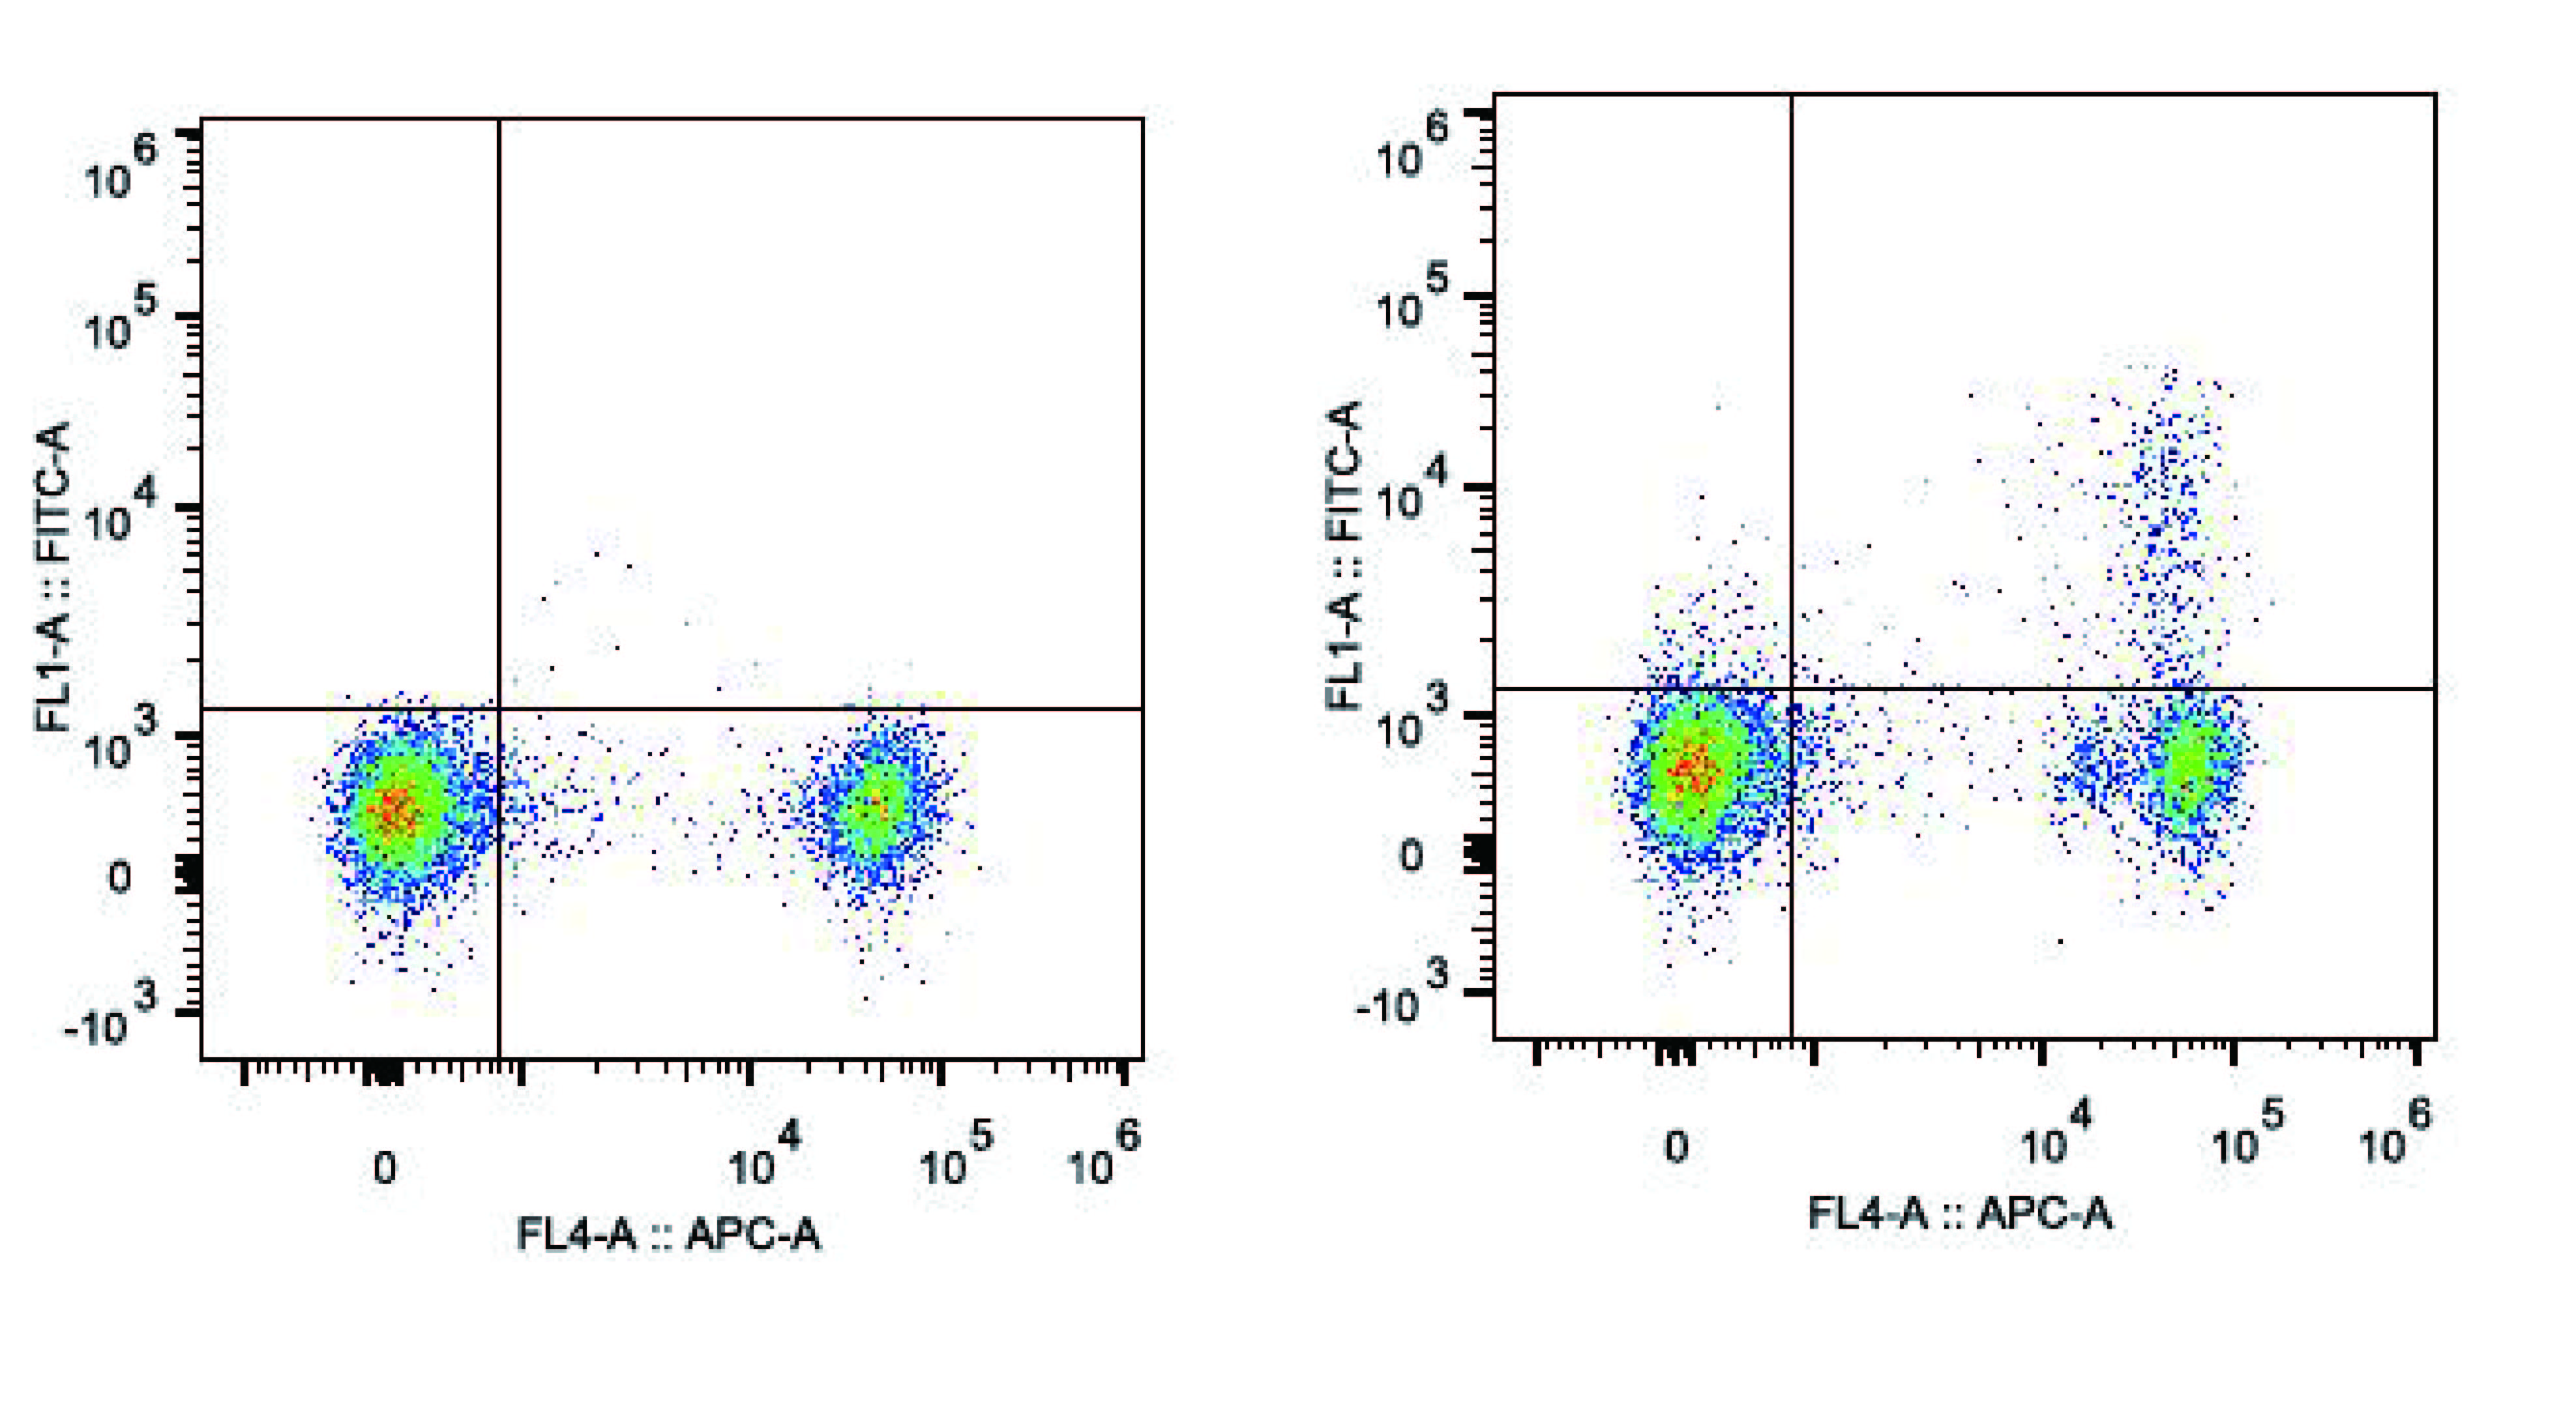 C57BL/6 murine splenocytes are stained with Anti-Mouse CD25 Monoclonal Antibody(FITC Conjugated)[Used at 0.2 μg/10<sup>6</sup> cells dilution]and Anti-Mouse CD4 Monoclonal Antibody(APC Conjugated)(right)). Splenocytes stained with Anti-Mouse CD4 Monoclonal Antibody(APC Conjugated).are used as control.